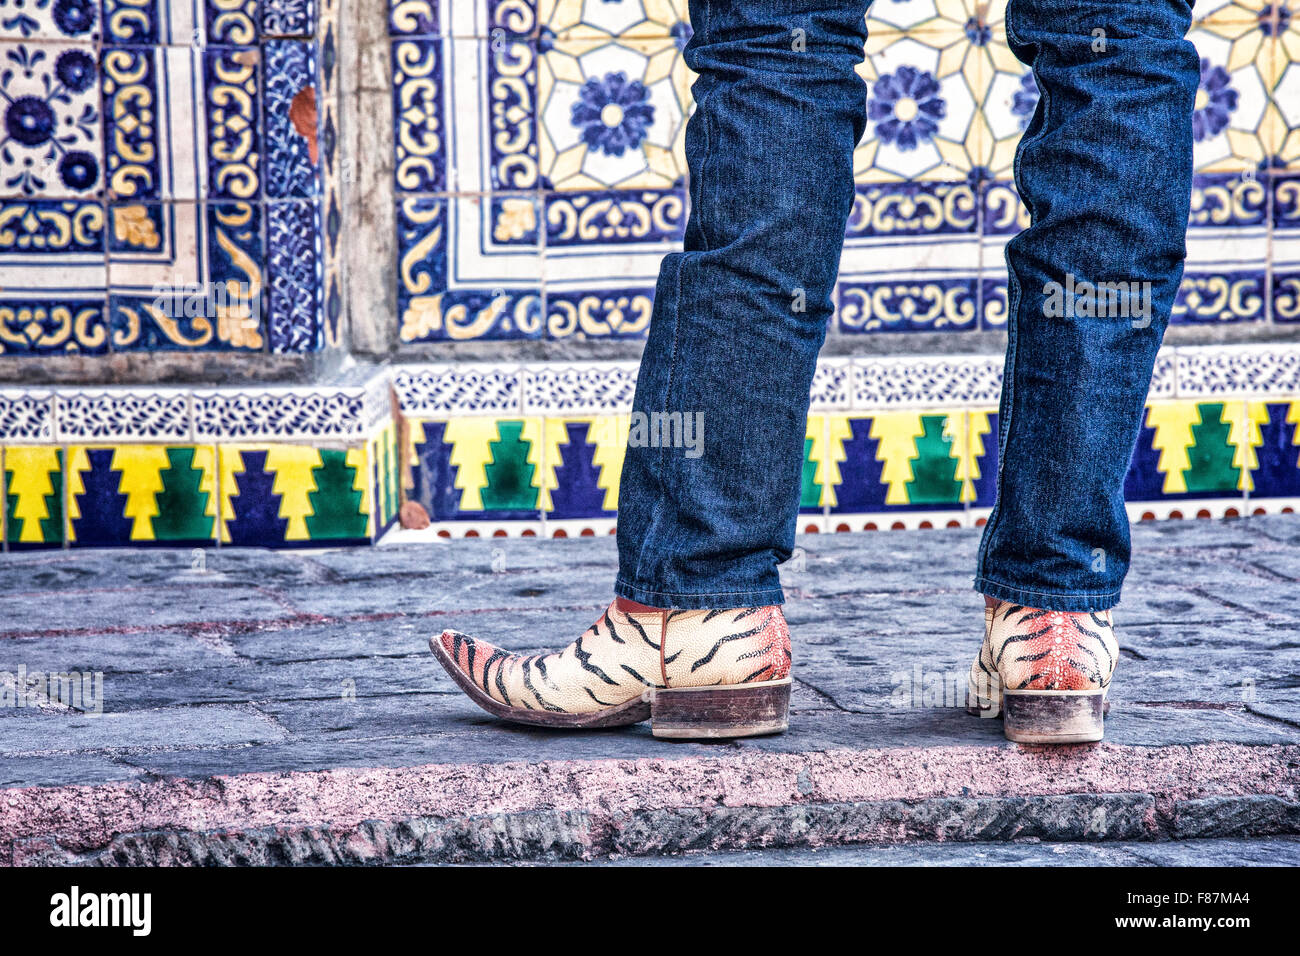 Fancy boots and tile on display in Dolores Hidalgo, Mexico. Stock Photo